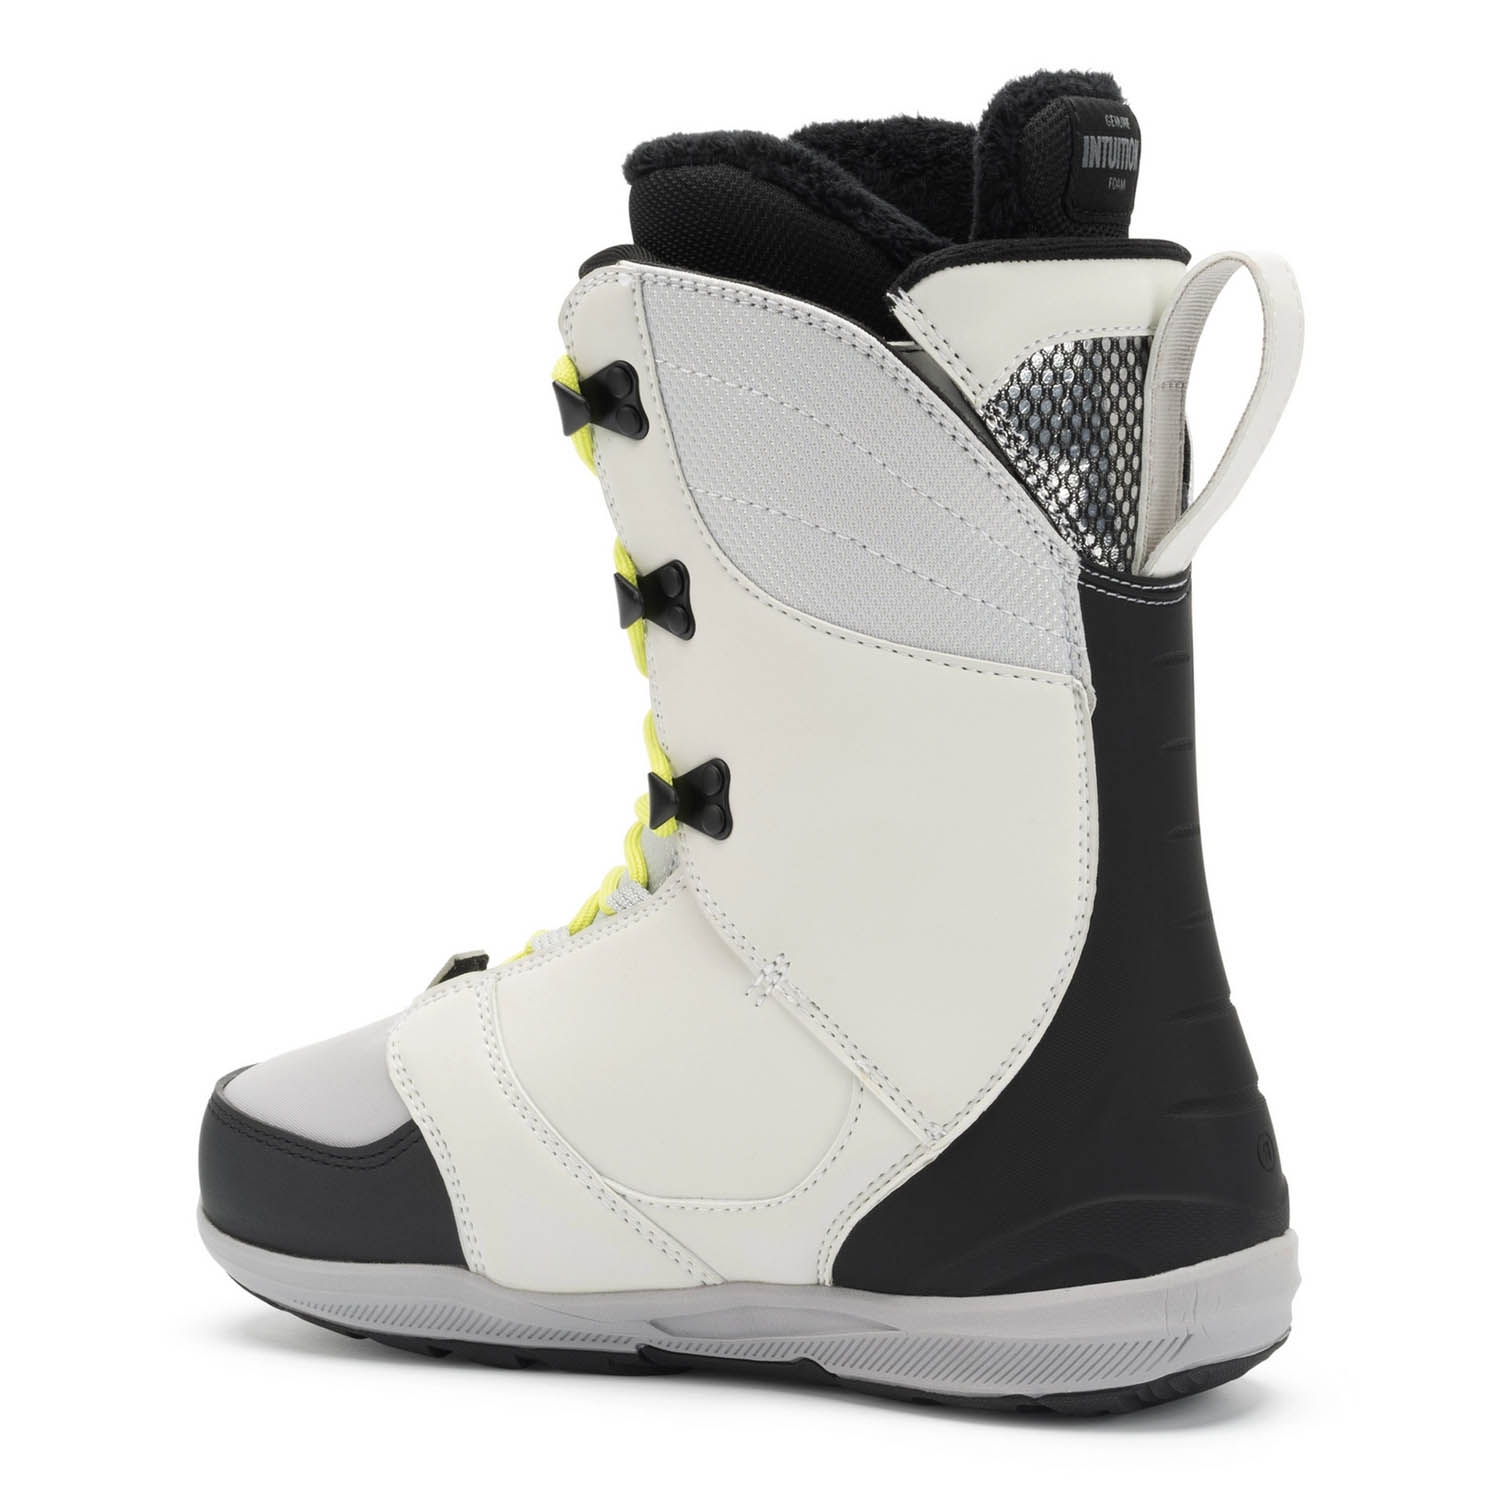 Ride Context Snowboard Boots Purps 2022